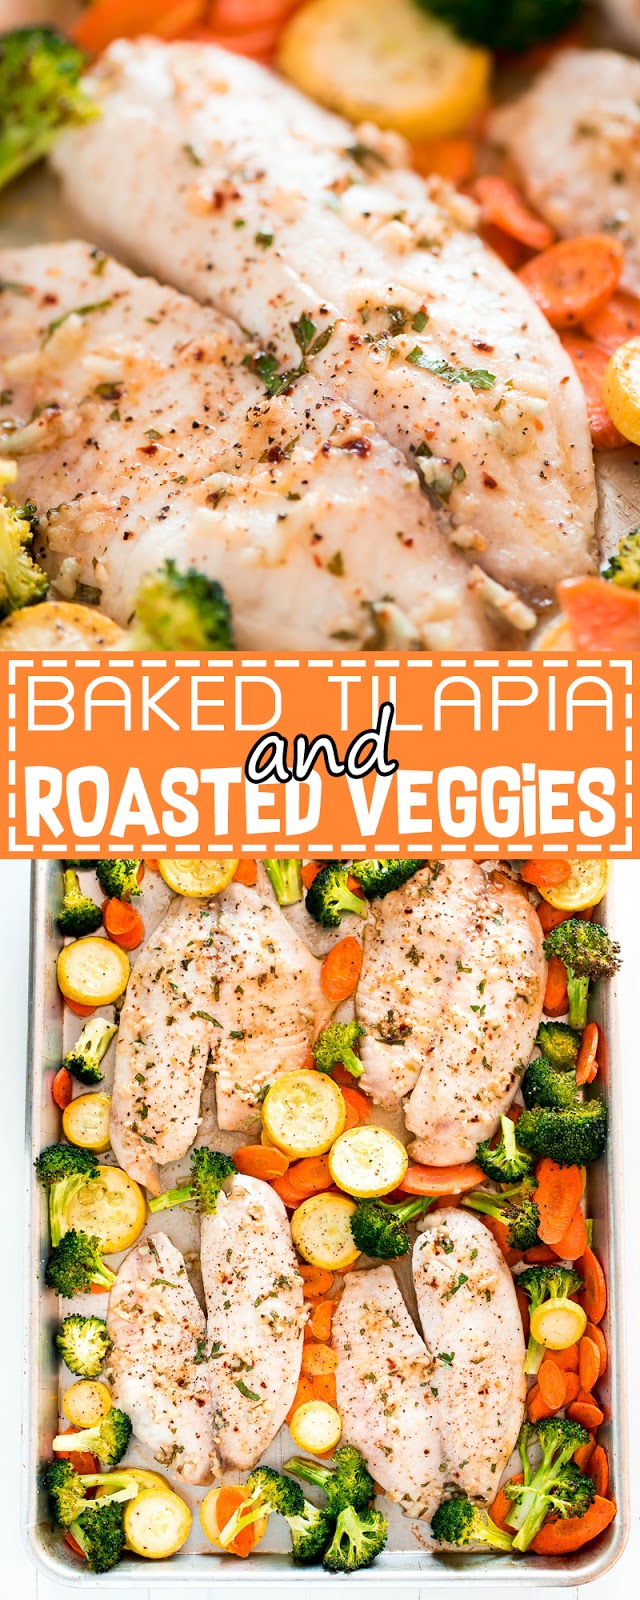 BAKED TILAPIA AND ROASTED VEGGIES